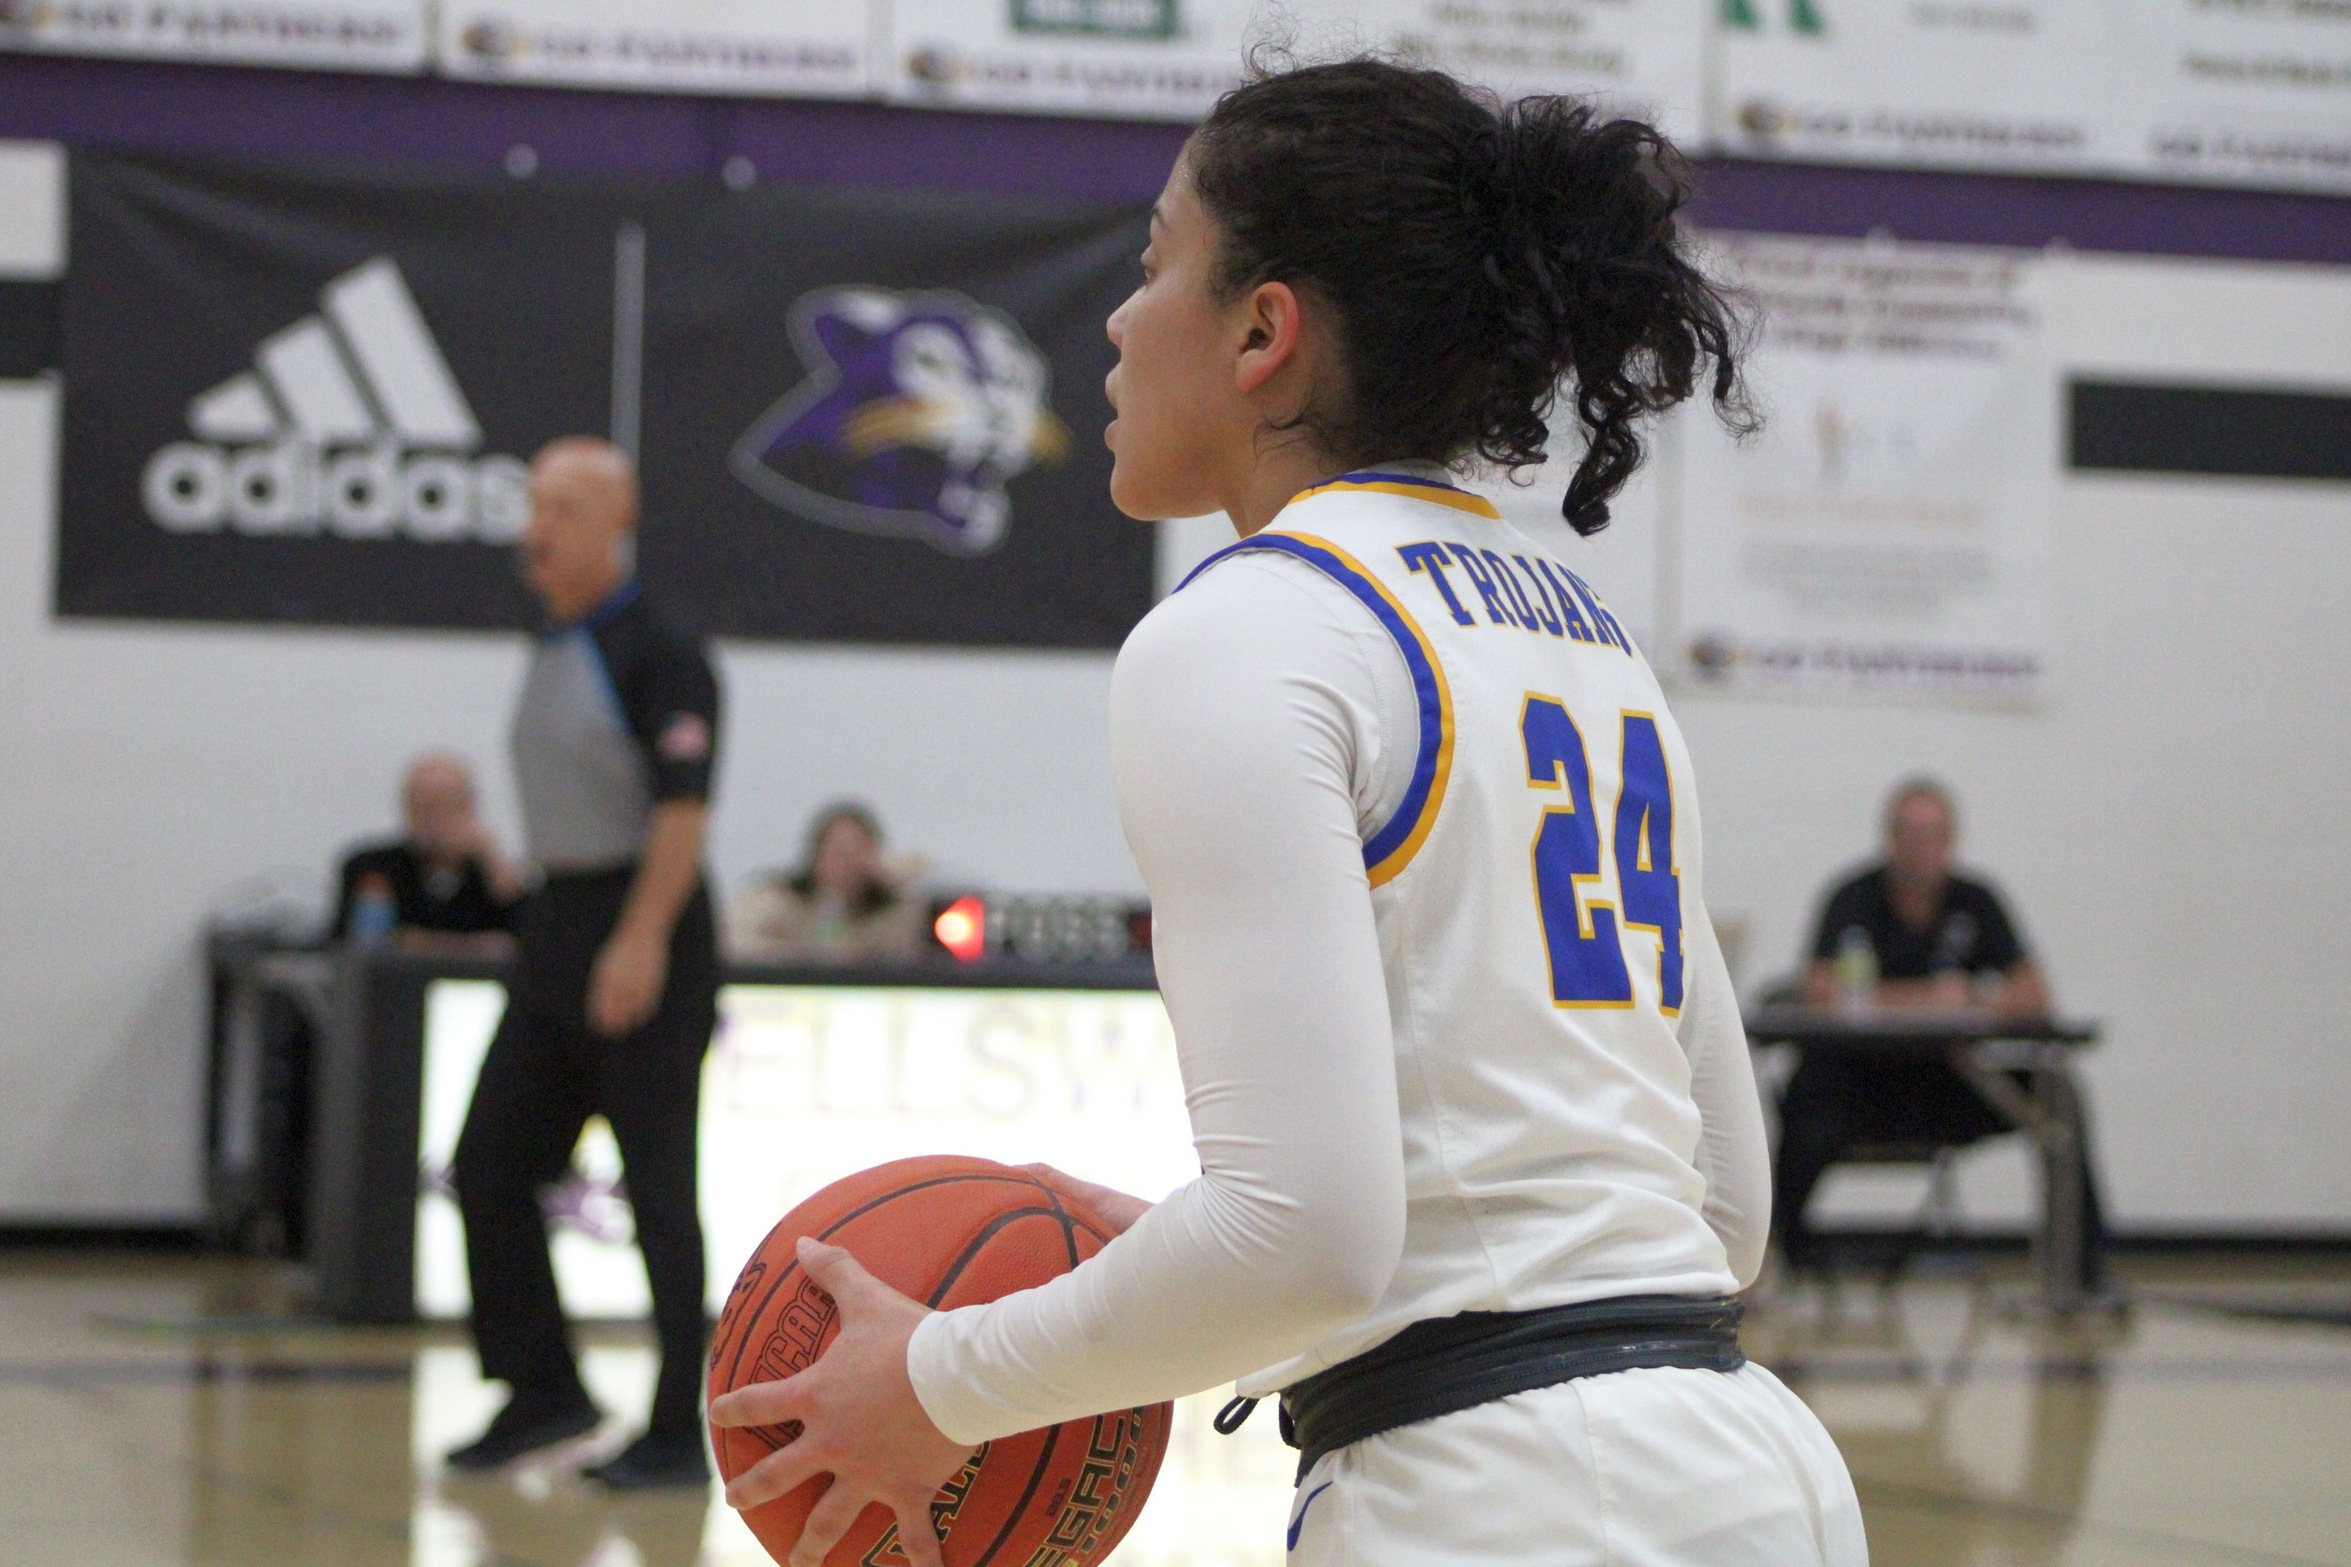 NIACC's Audrey Martinez-Stewart was selected as the ICCAC women's basketball player of the week for the week of Jan. 2-8.